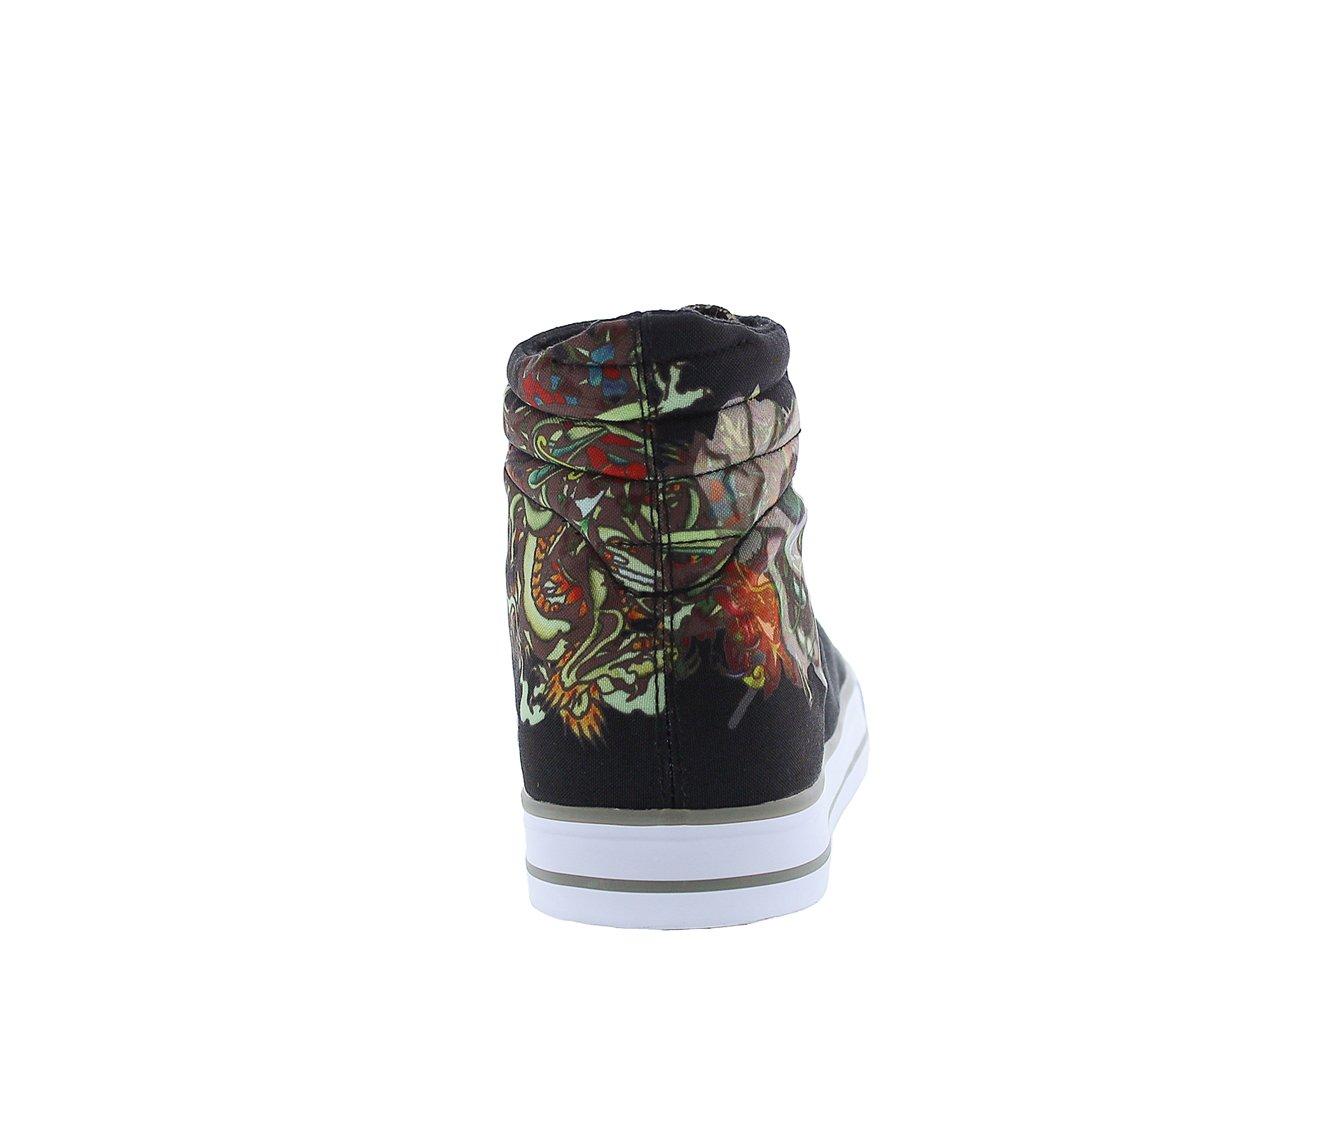 Men's Ed Hardy Still Life High-Top Casual Sneakers